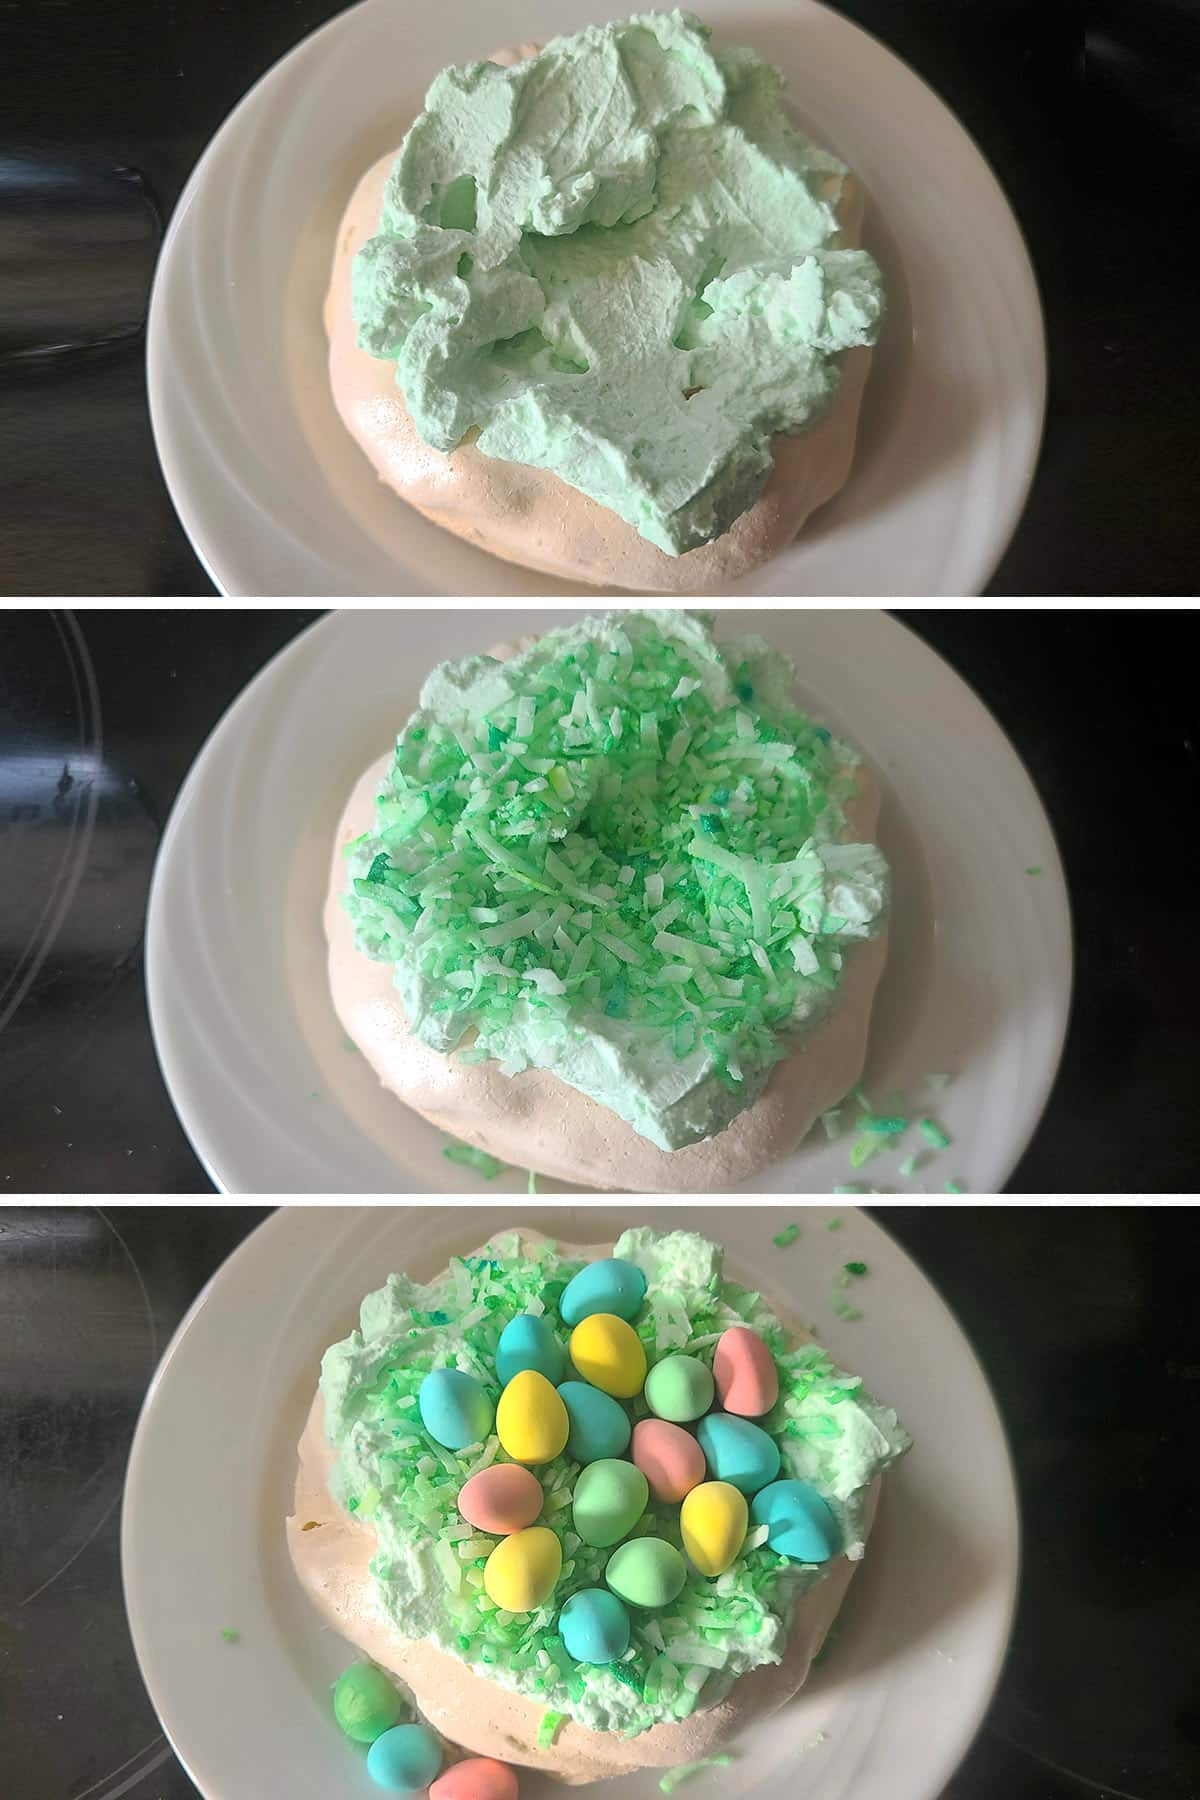 A 3 part image showing a mini pavlova being spread with whipped cream, coconut, and mini eggs.